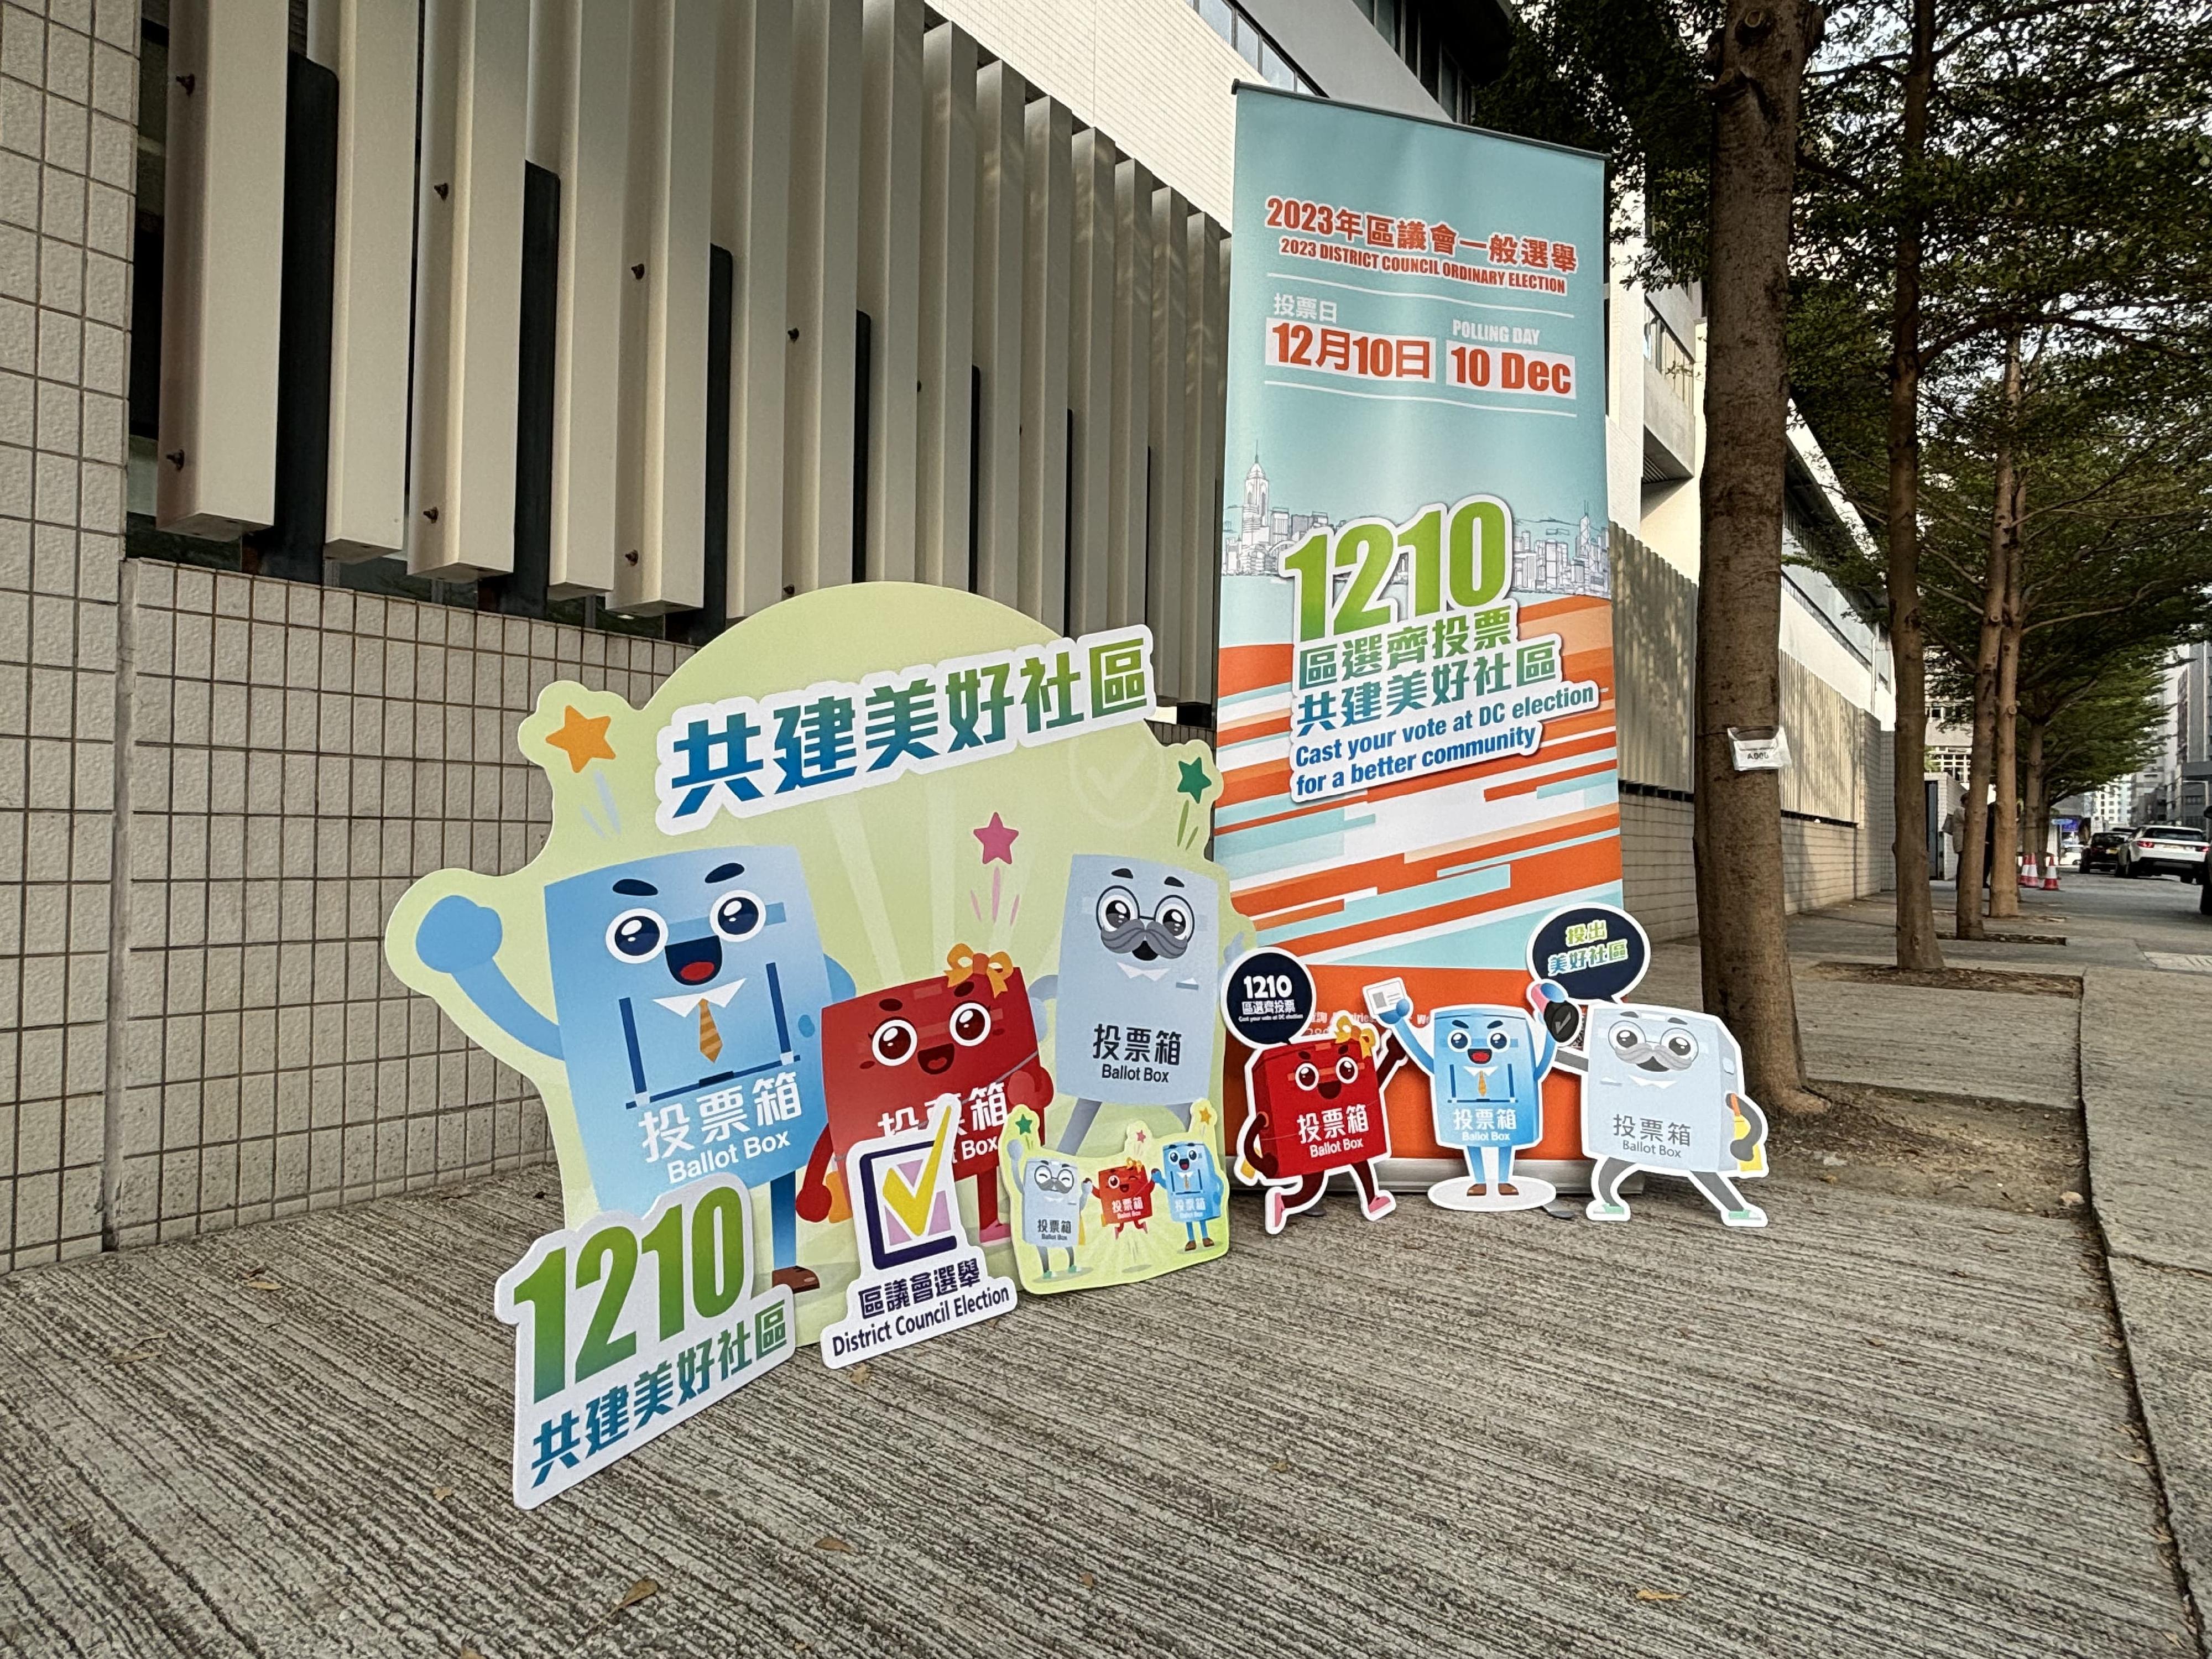 The Hong Kong Special Administrative Region Government will set up a "check-in" spot next to the polling stations for the public to take photos on the polling day of the District Council election (December 10).